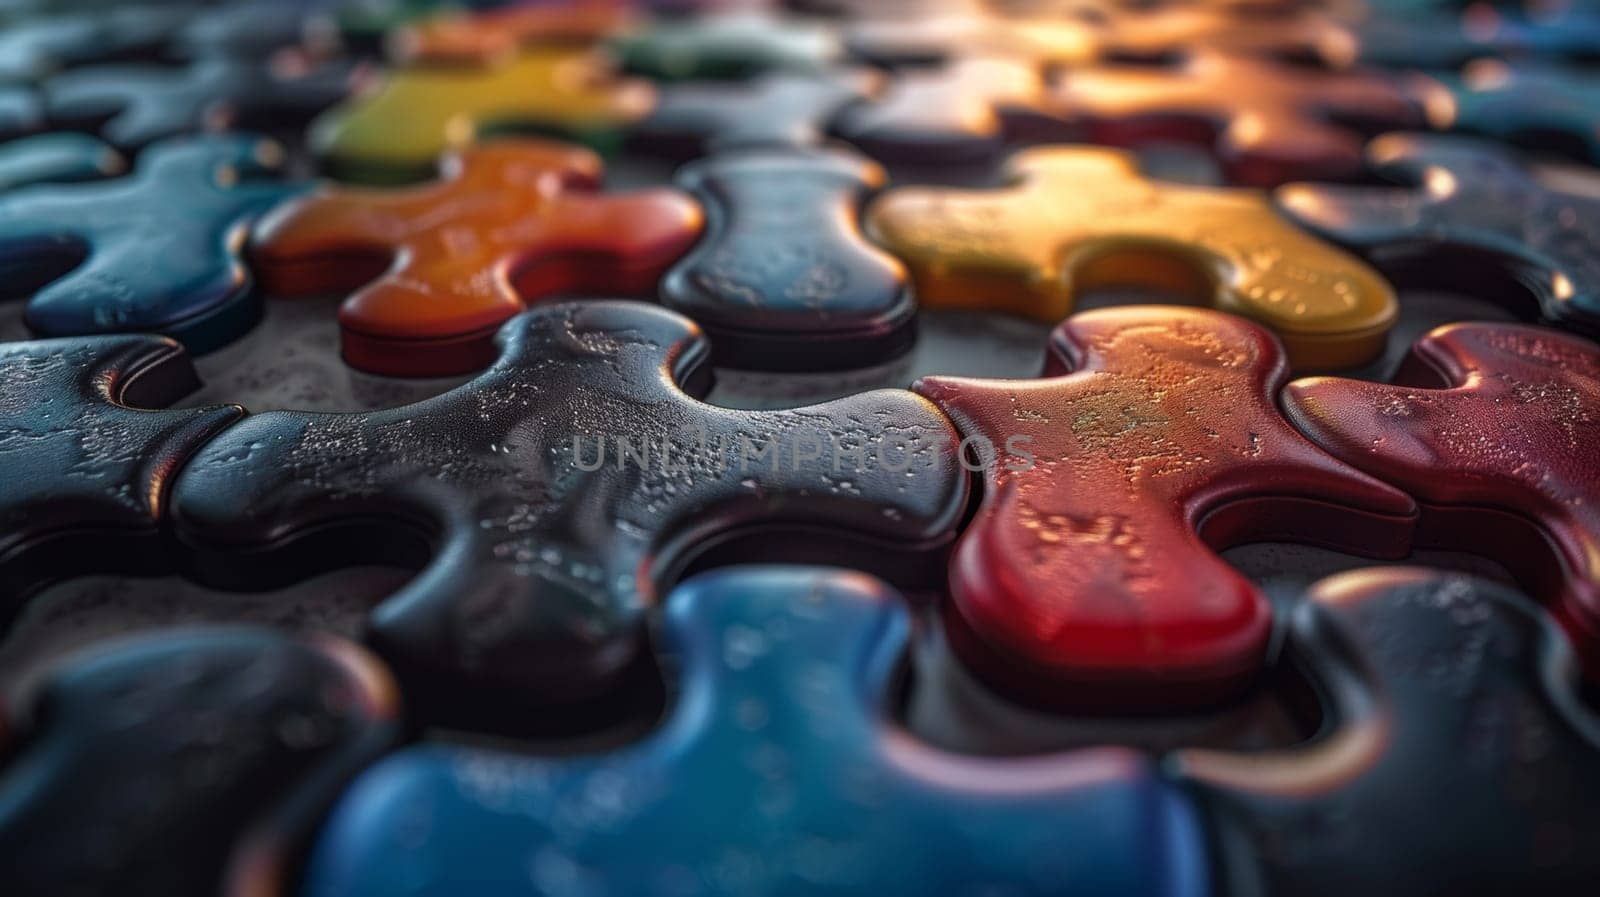 A close up of a puzzle piece with many colors on it